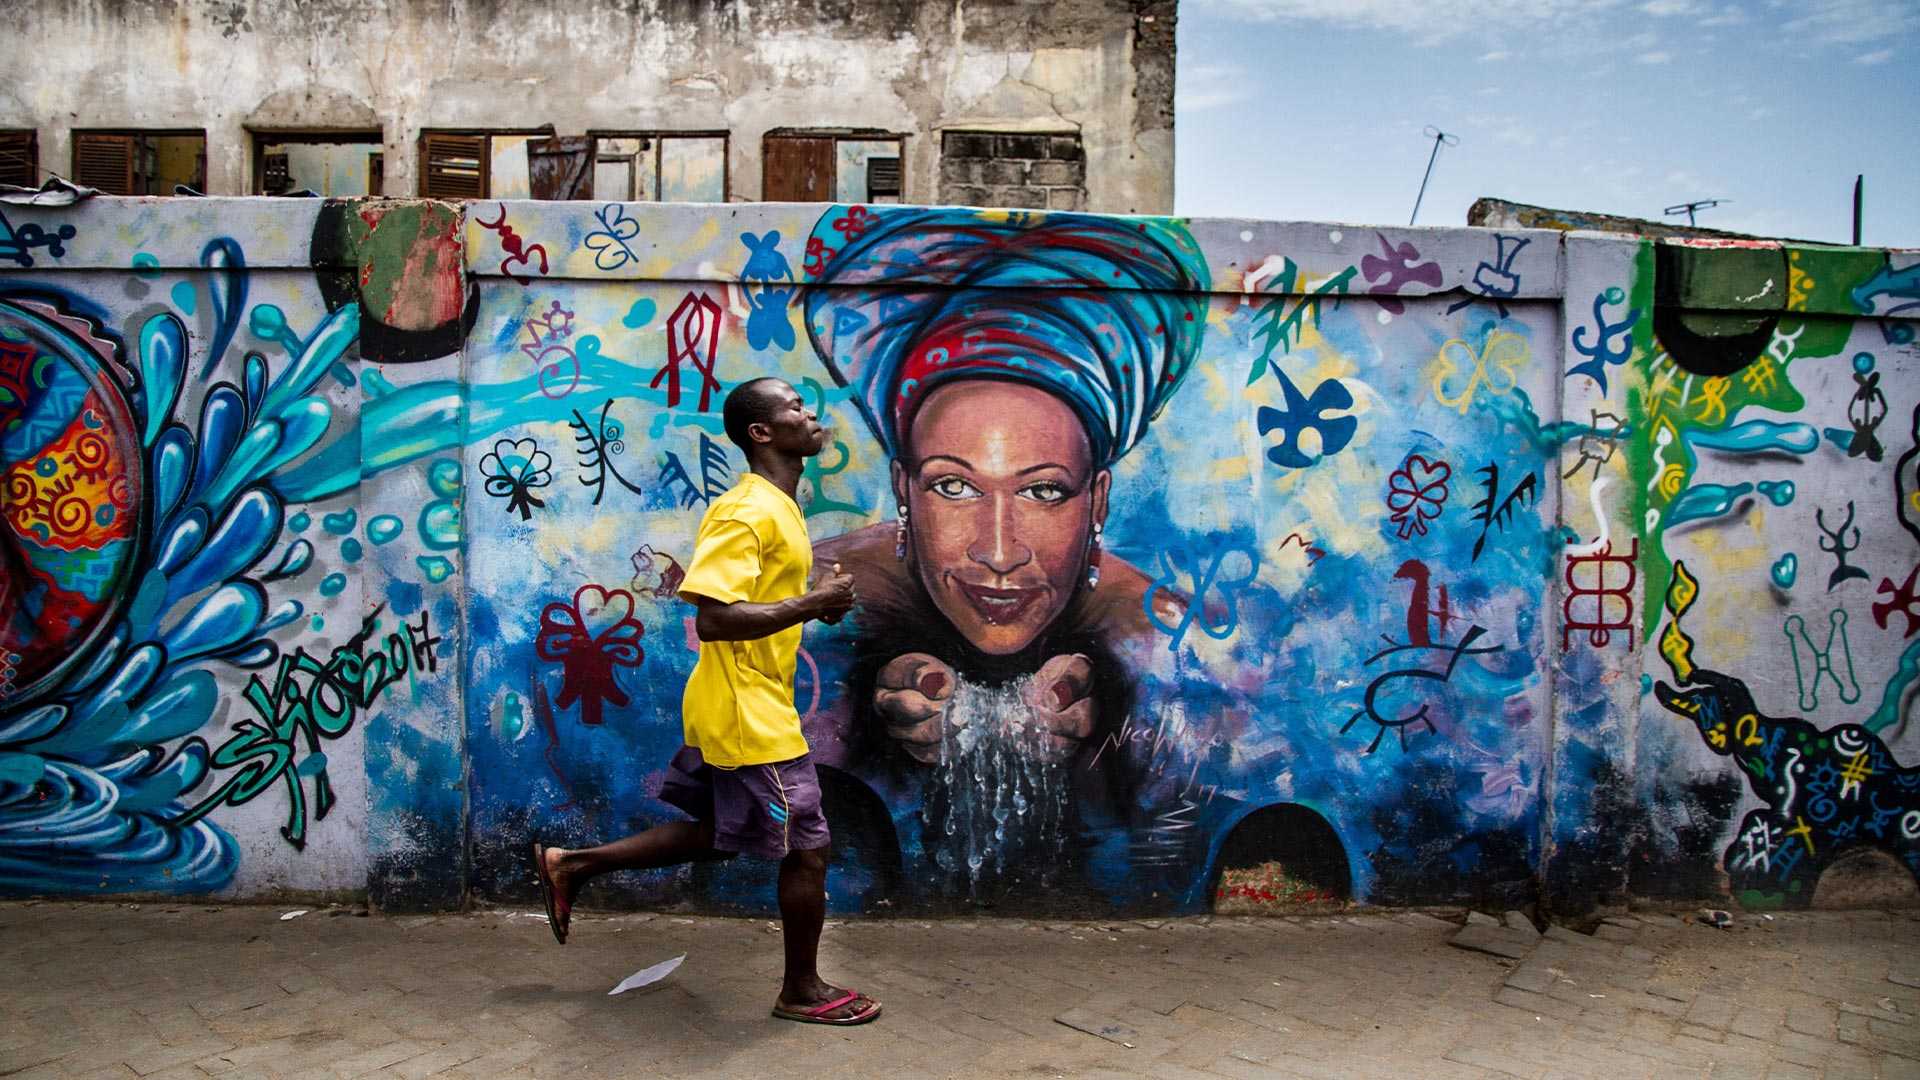 A man in Ghana running in the street in front of a wall painted with urban art